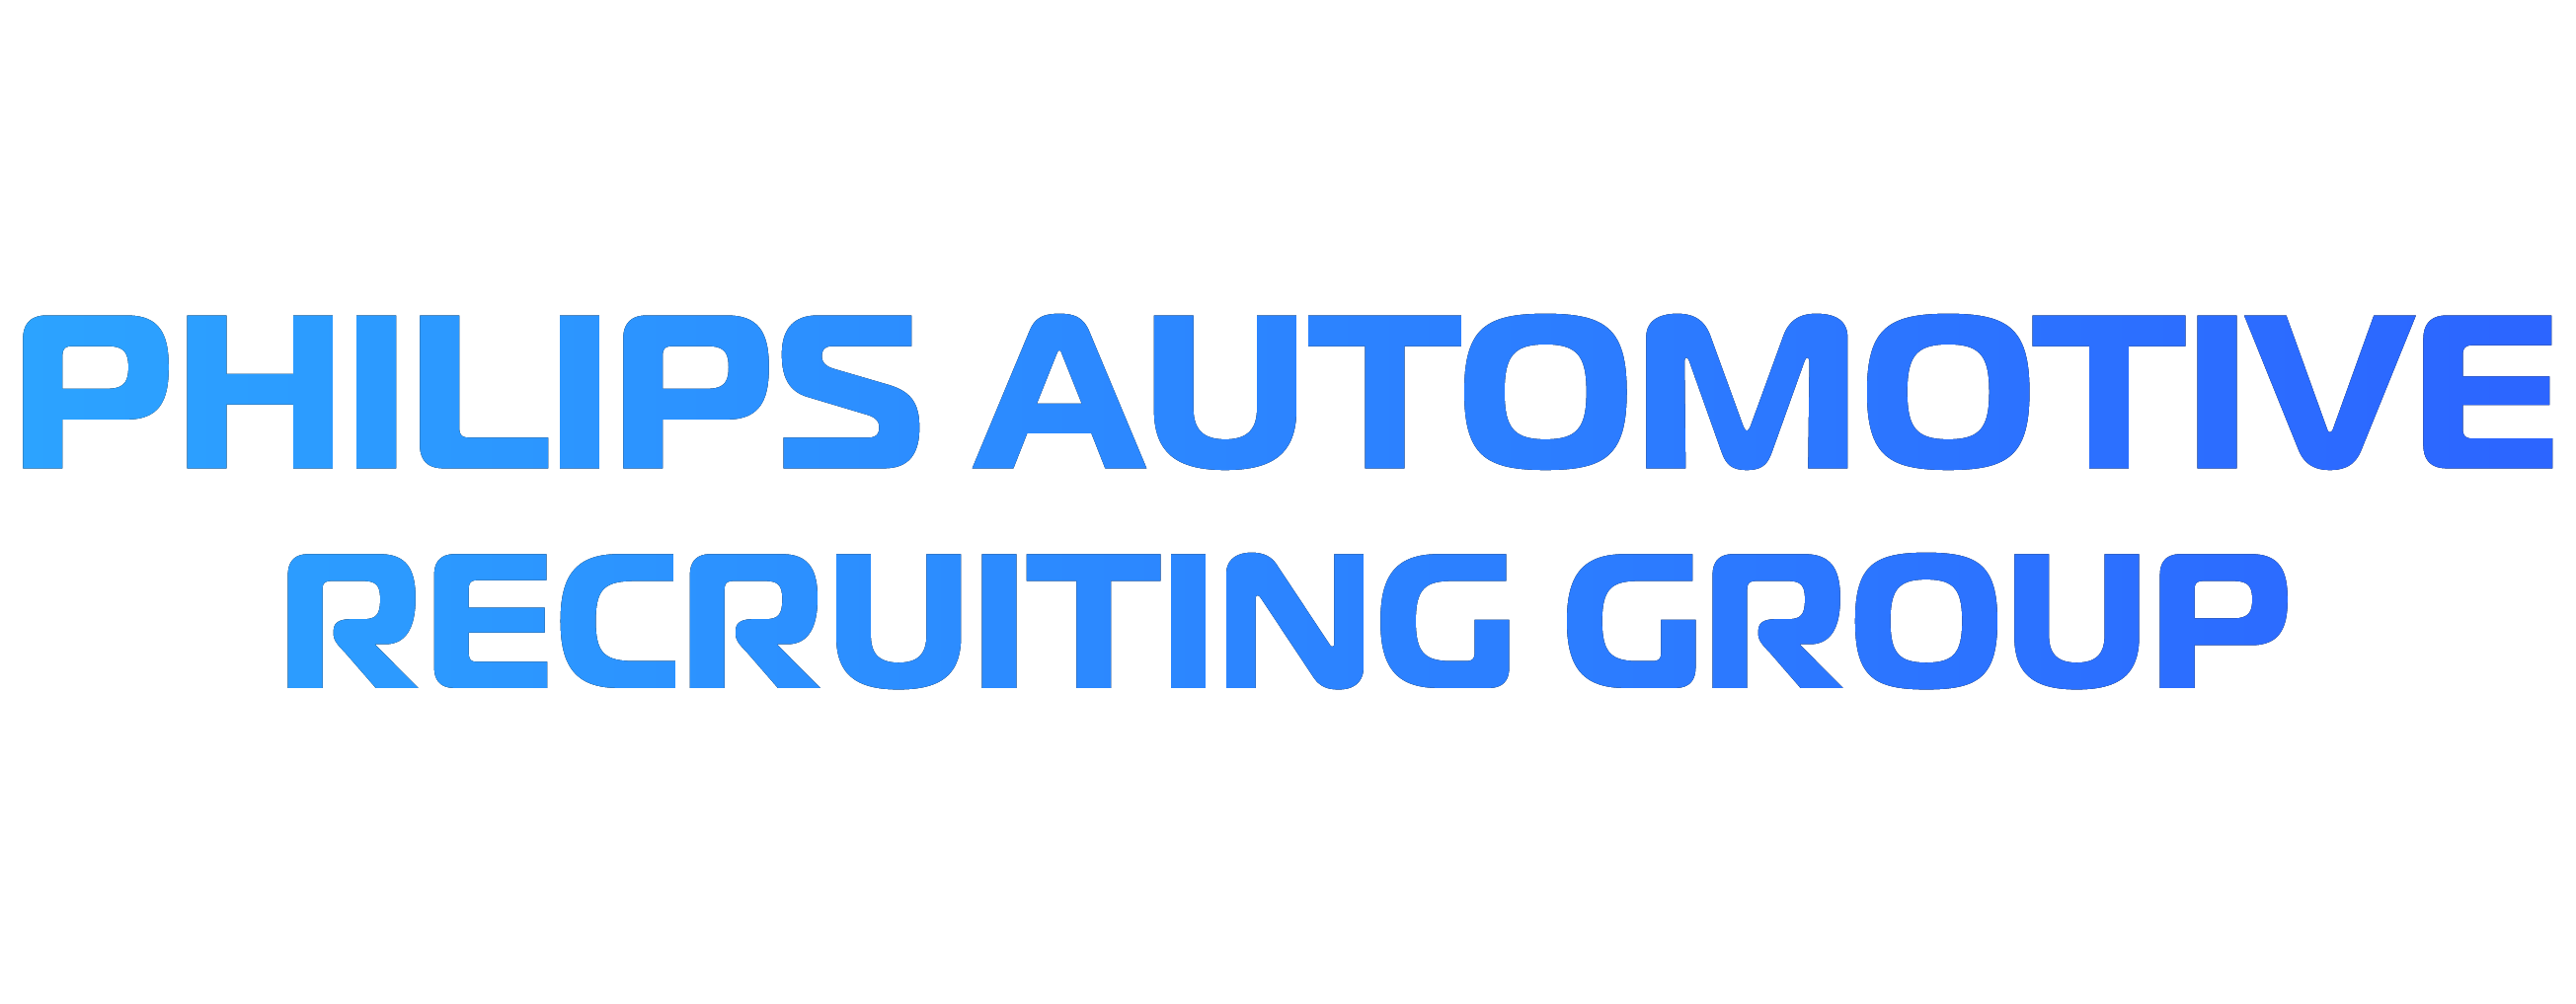 Philips Automotive Recruiting Group